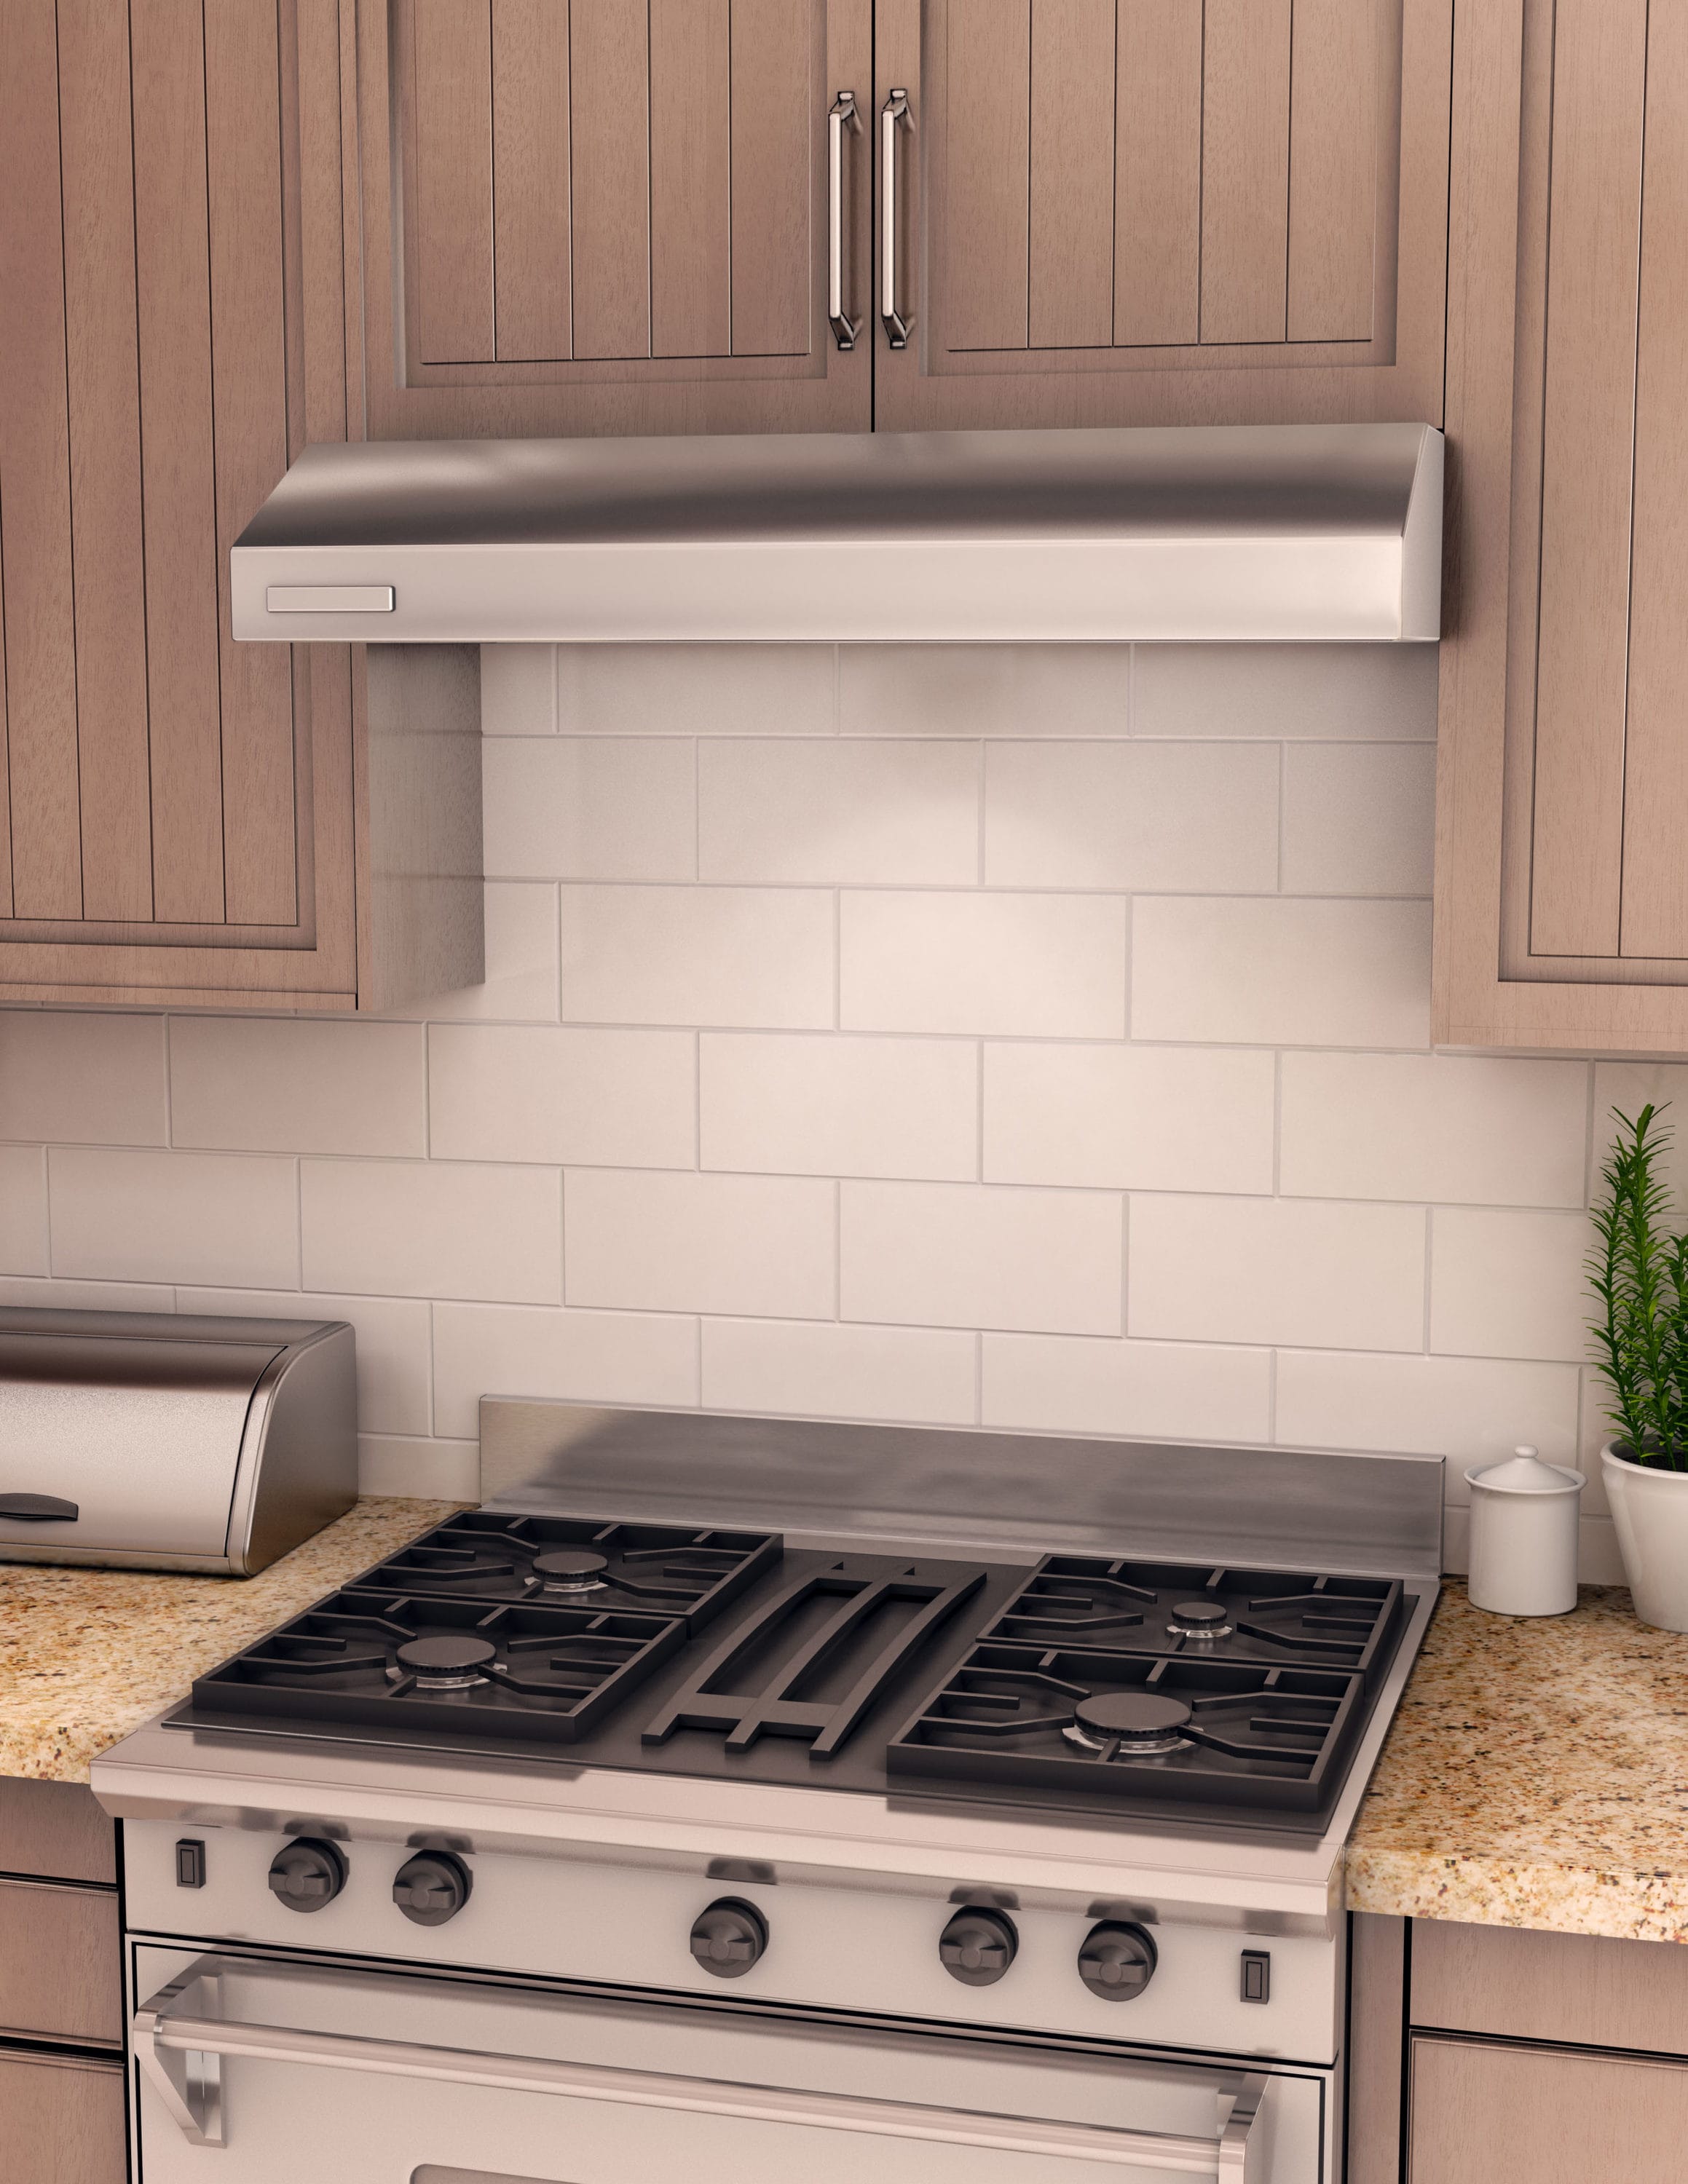 Stainless Backsplash, 30 X 23.25 with Hemmed Edges - RiversEdge Products